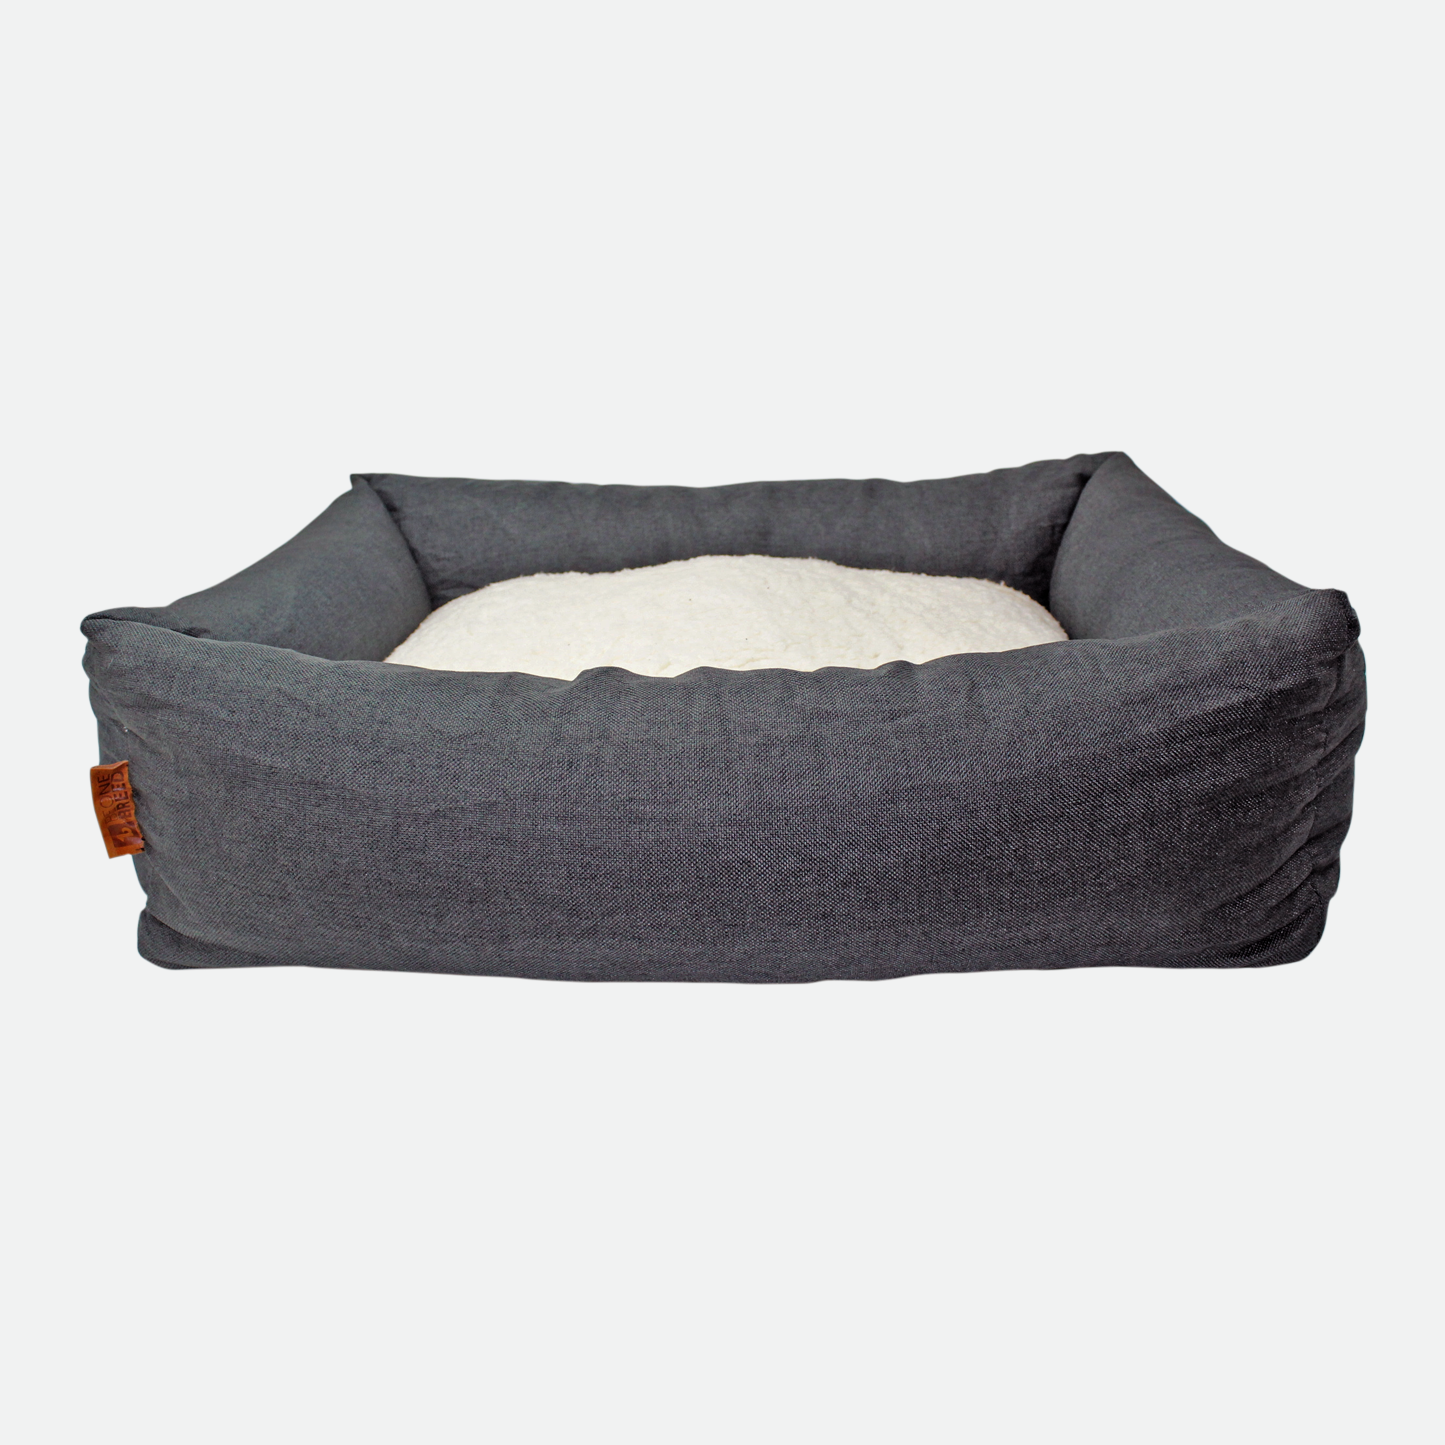 Memory foam pet bed with padded sides, gray and sherpa